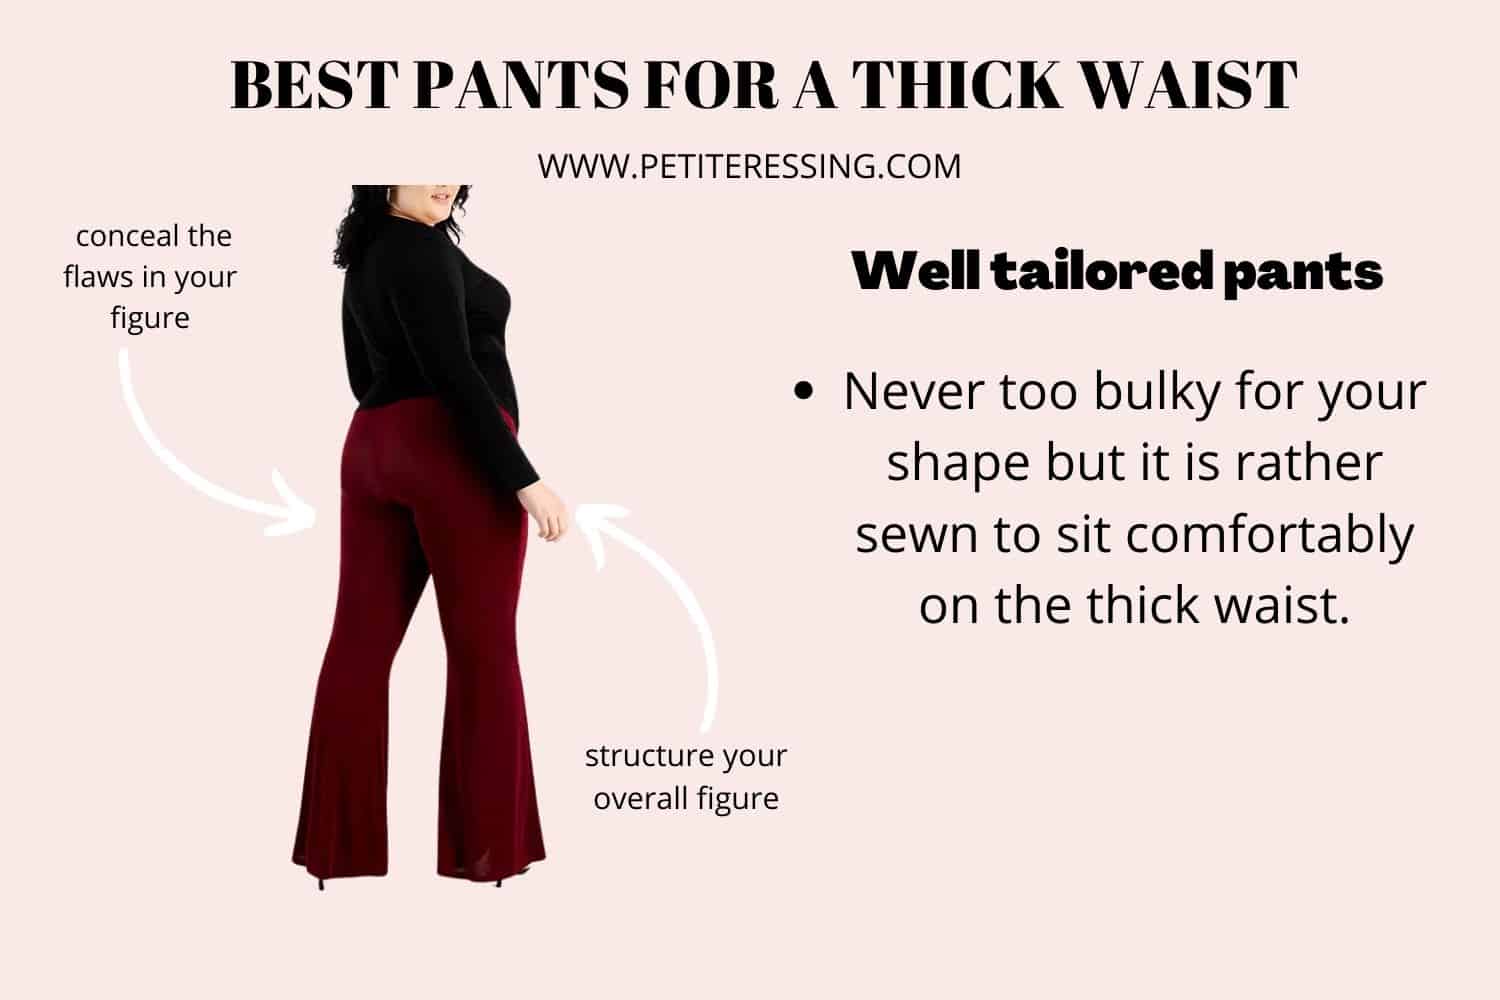 The Complete Pants Guide for Women with Thick Waist